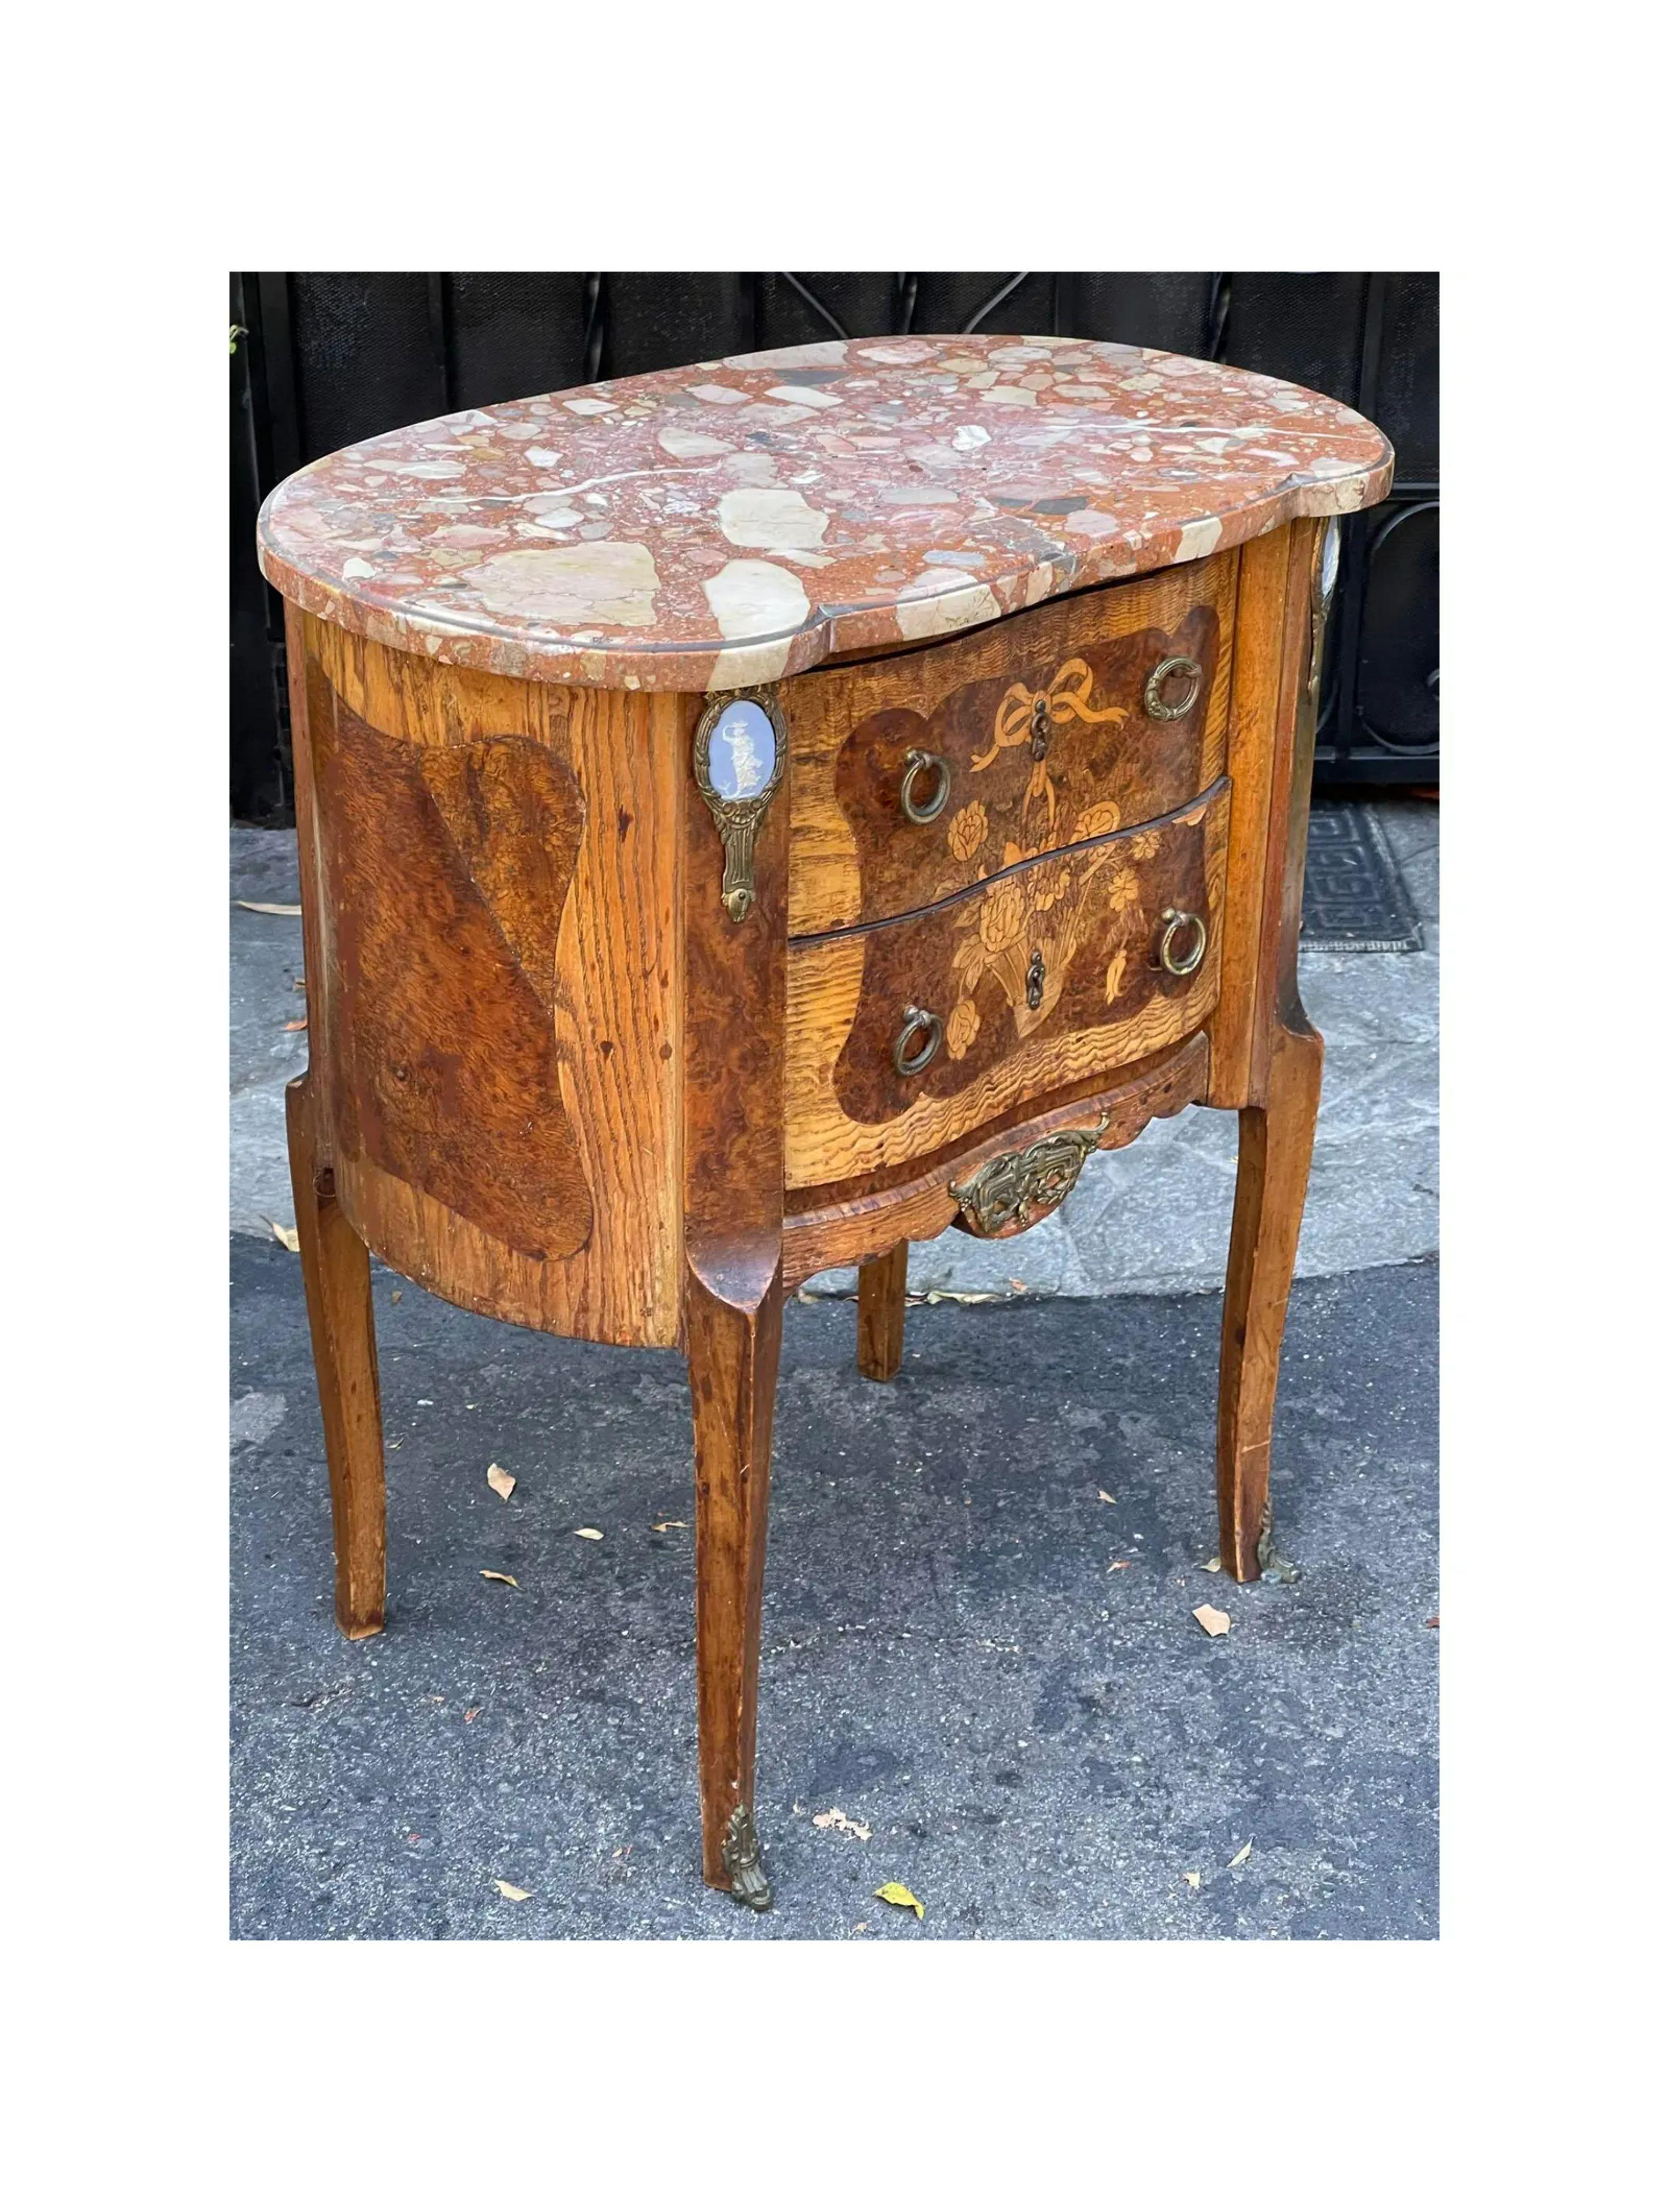 Antique Wedgwood Jasperware mounted marble top satinwood inlaid end table. This lovely table is a genuine antique and features satinwood inlaid details and blue Wedgwood plaques mounted in bronze. It features a rouge marble top and an unusual